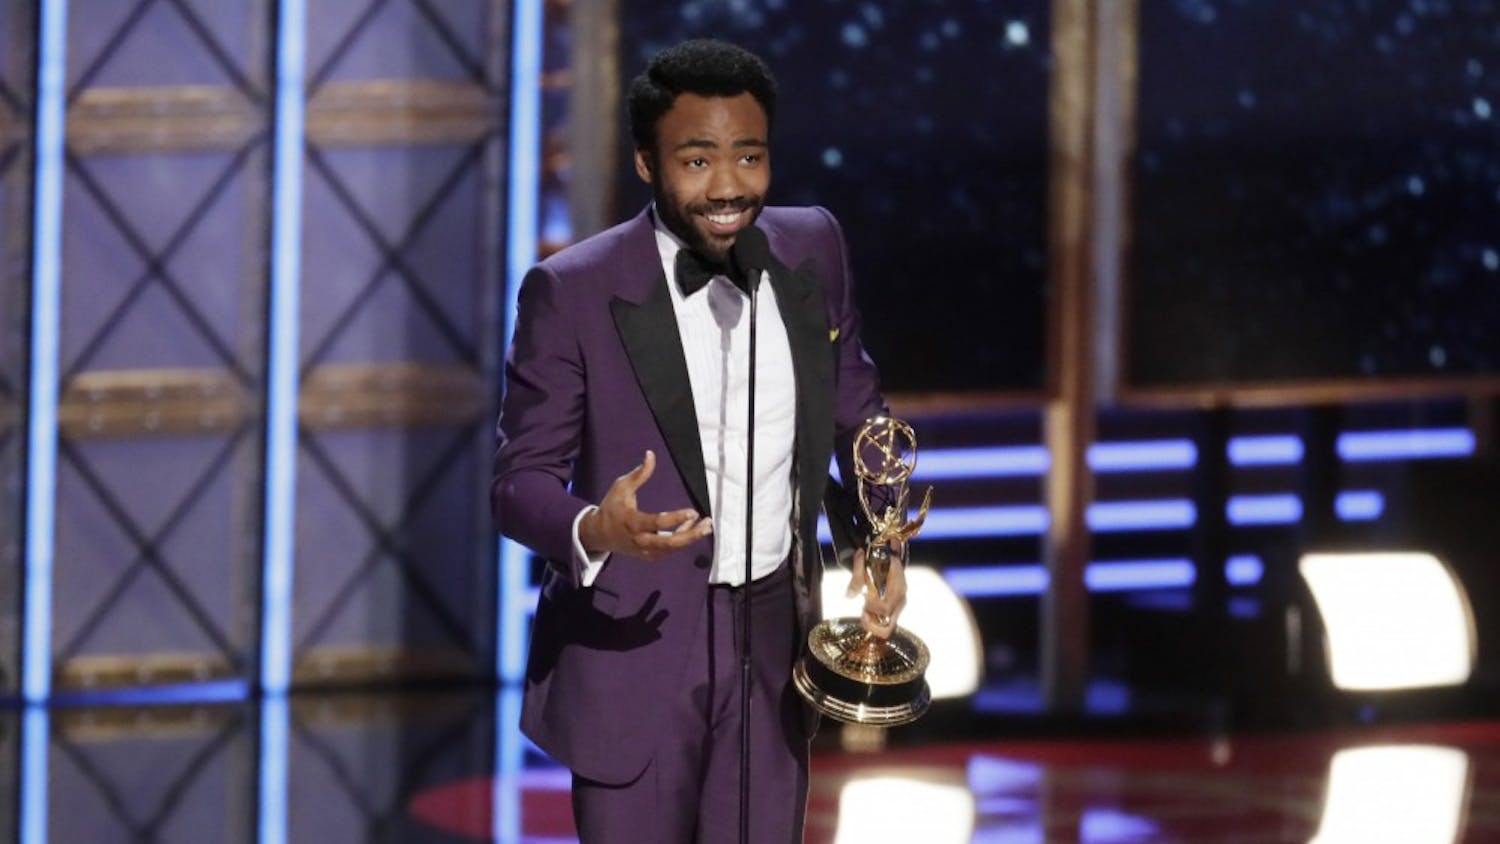 Donald Glover wins Outstanding Lead Actor in a Comedy Series during the show at the 69th Primetime Emmy Awards at the Microsoft Theater in Los Angeles on Sunday, Sept. 17, 2017. (Robert Gauthier/Los Angeles Times/TNS)